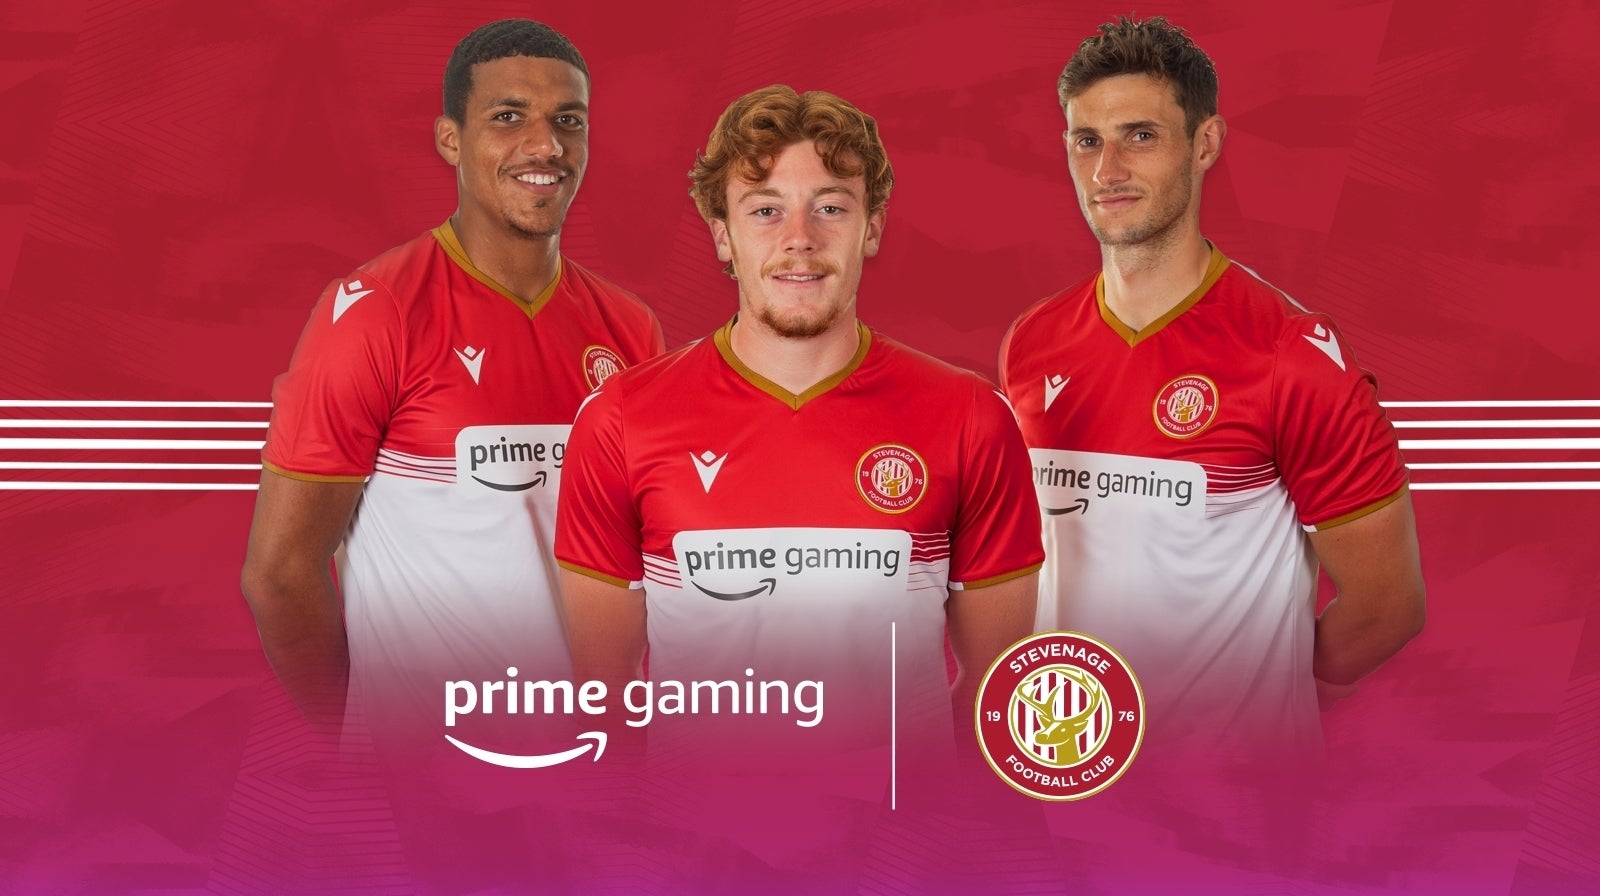 Image for Amazon Prime Gaming signs shirt sponsorship deal with… Stevenage FC